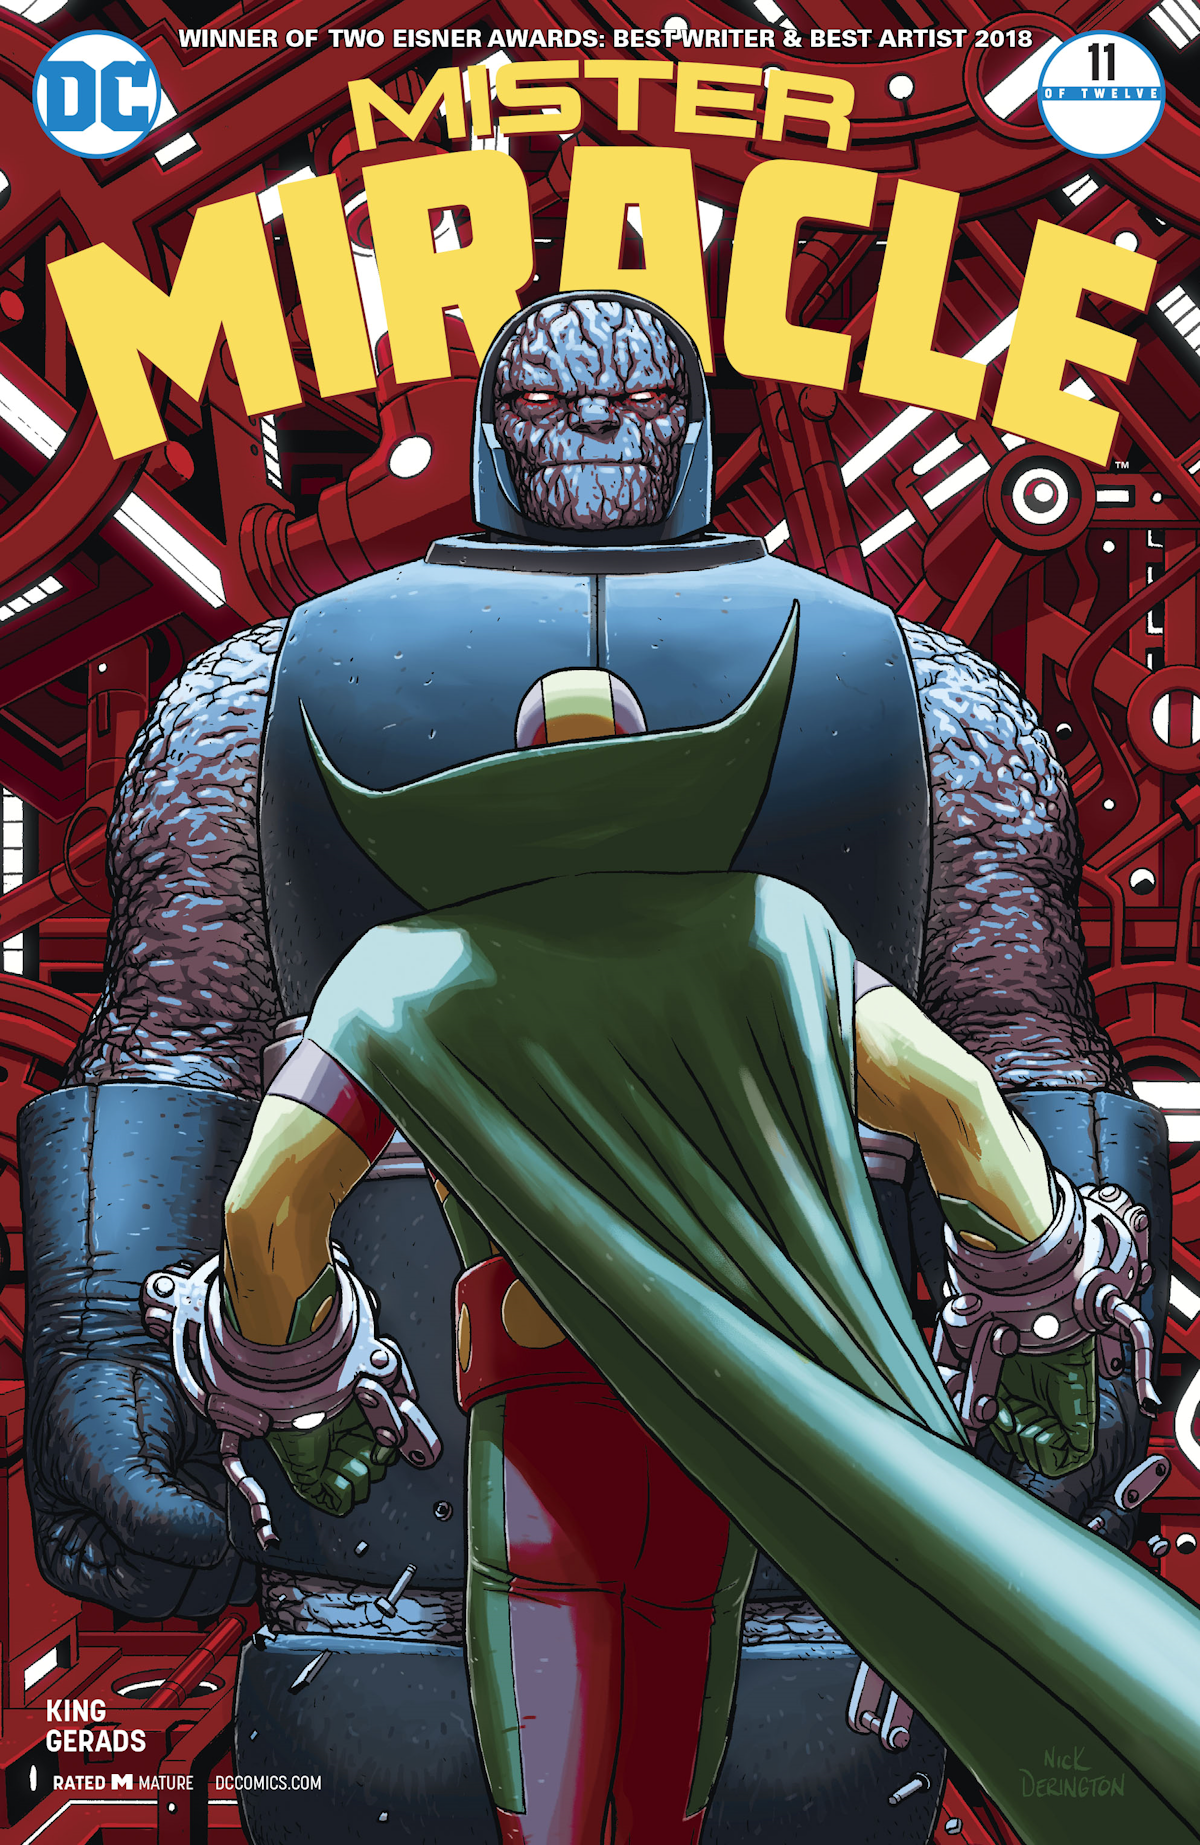 Mister Miracle Vol. 4 11 (Cover A)